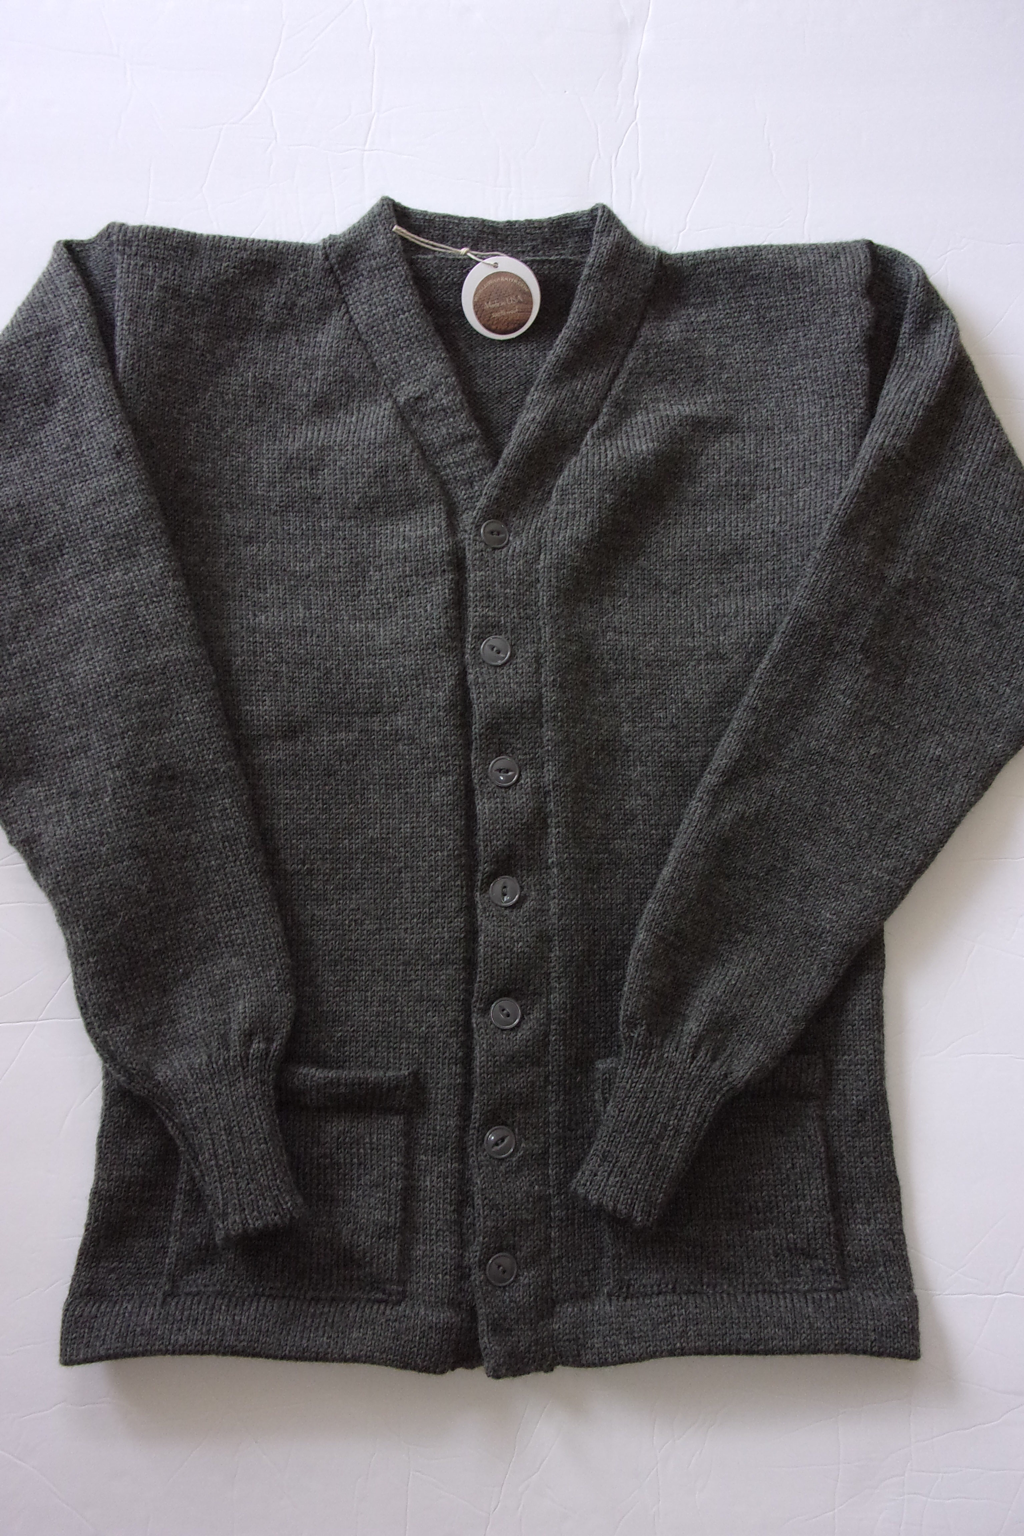 Great War WWI British Reproduction Cardigan with Seven 7 Buttons